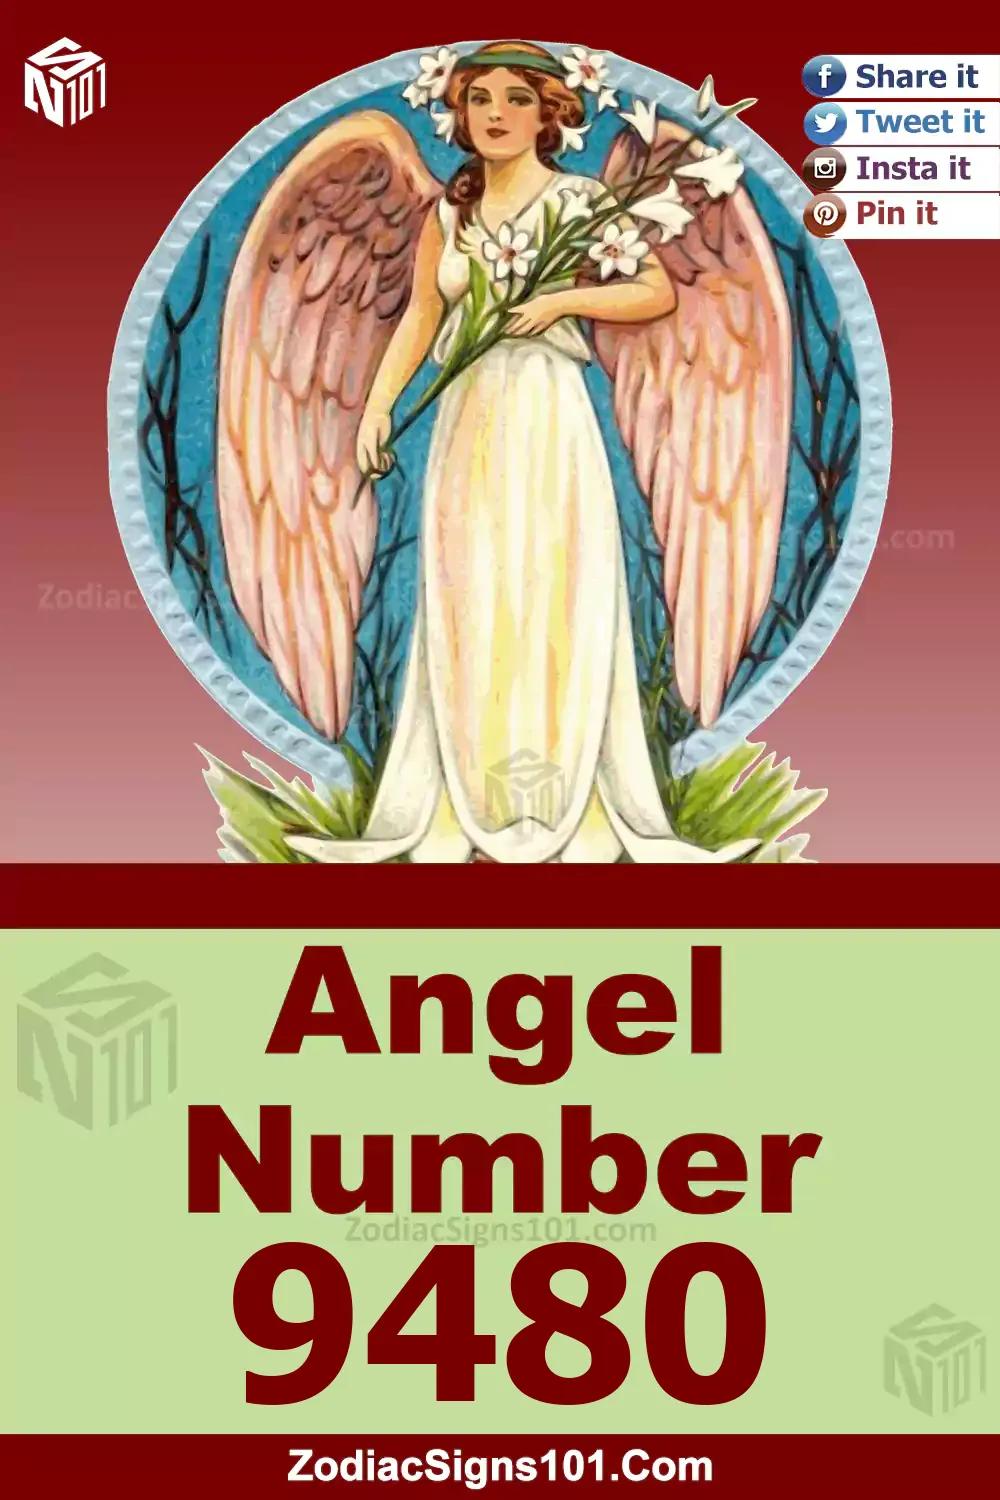 9480 Angel Number Meaning